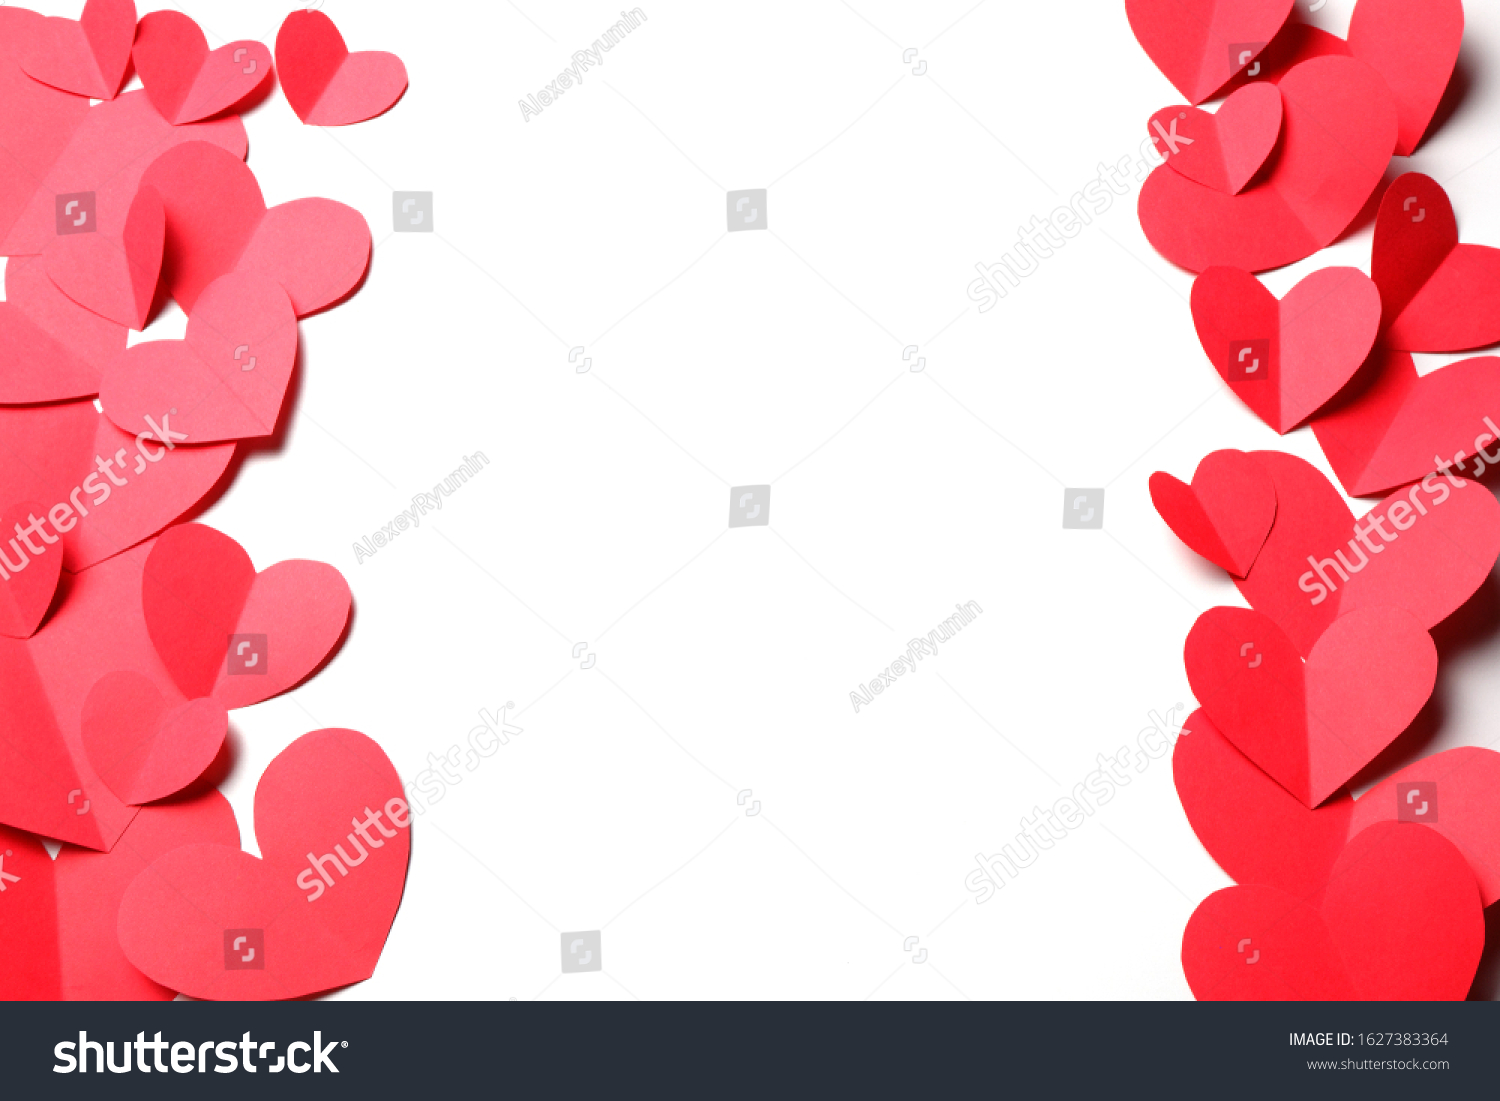 Cut out of red paper hearts on white background isolated. Cute Valentines day, Womans day, love, romantic or wedding composition with free space for custom tex for banner, congratulation, card, offer, flyer, advertising, invitation.